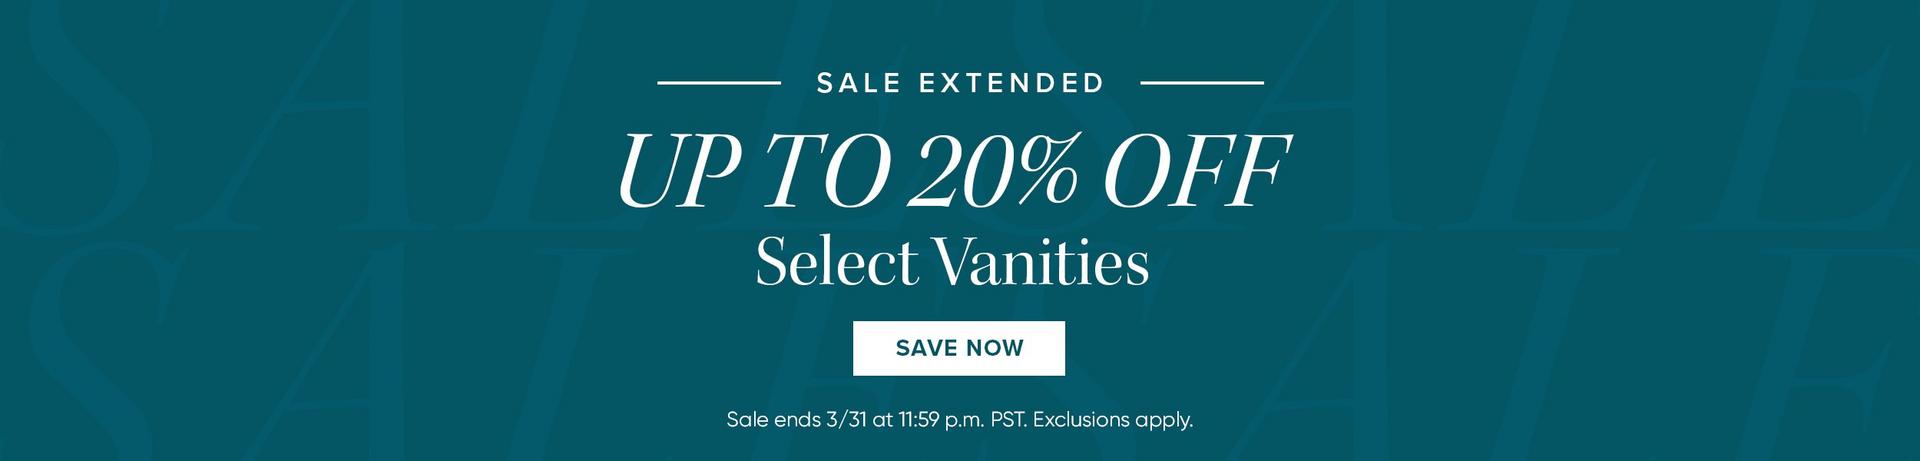 Sale Extended - Up to 20% Off Select Vanities, Save Now